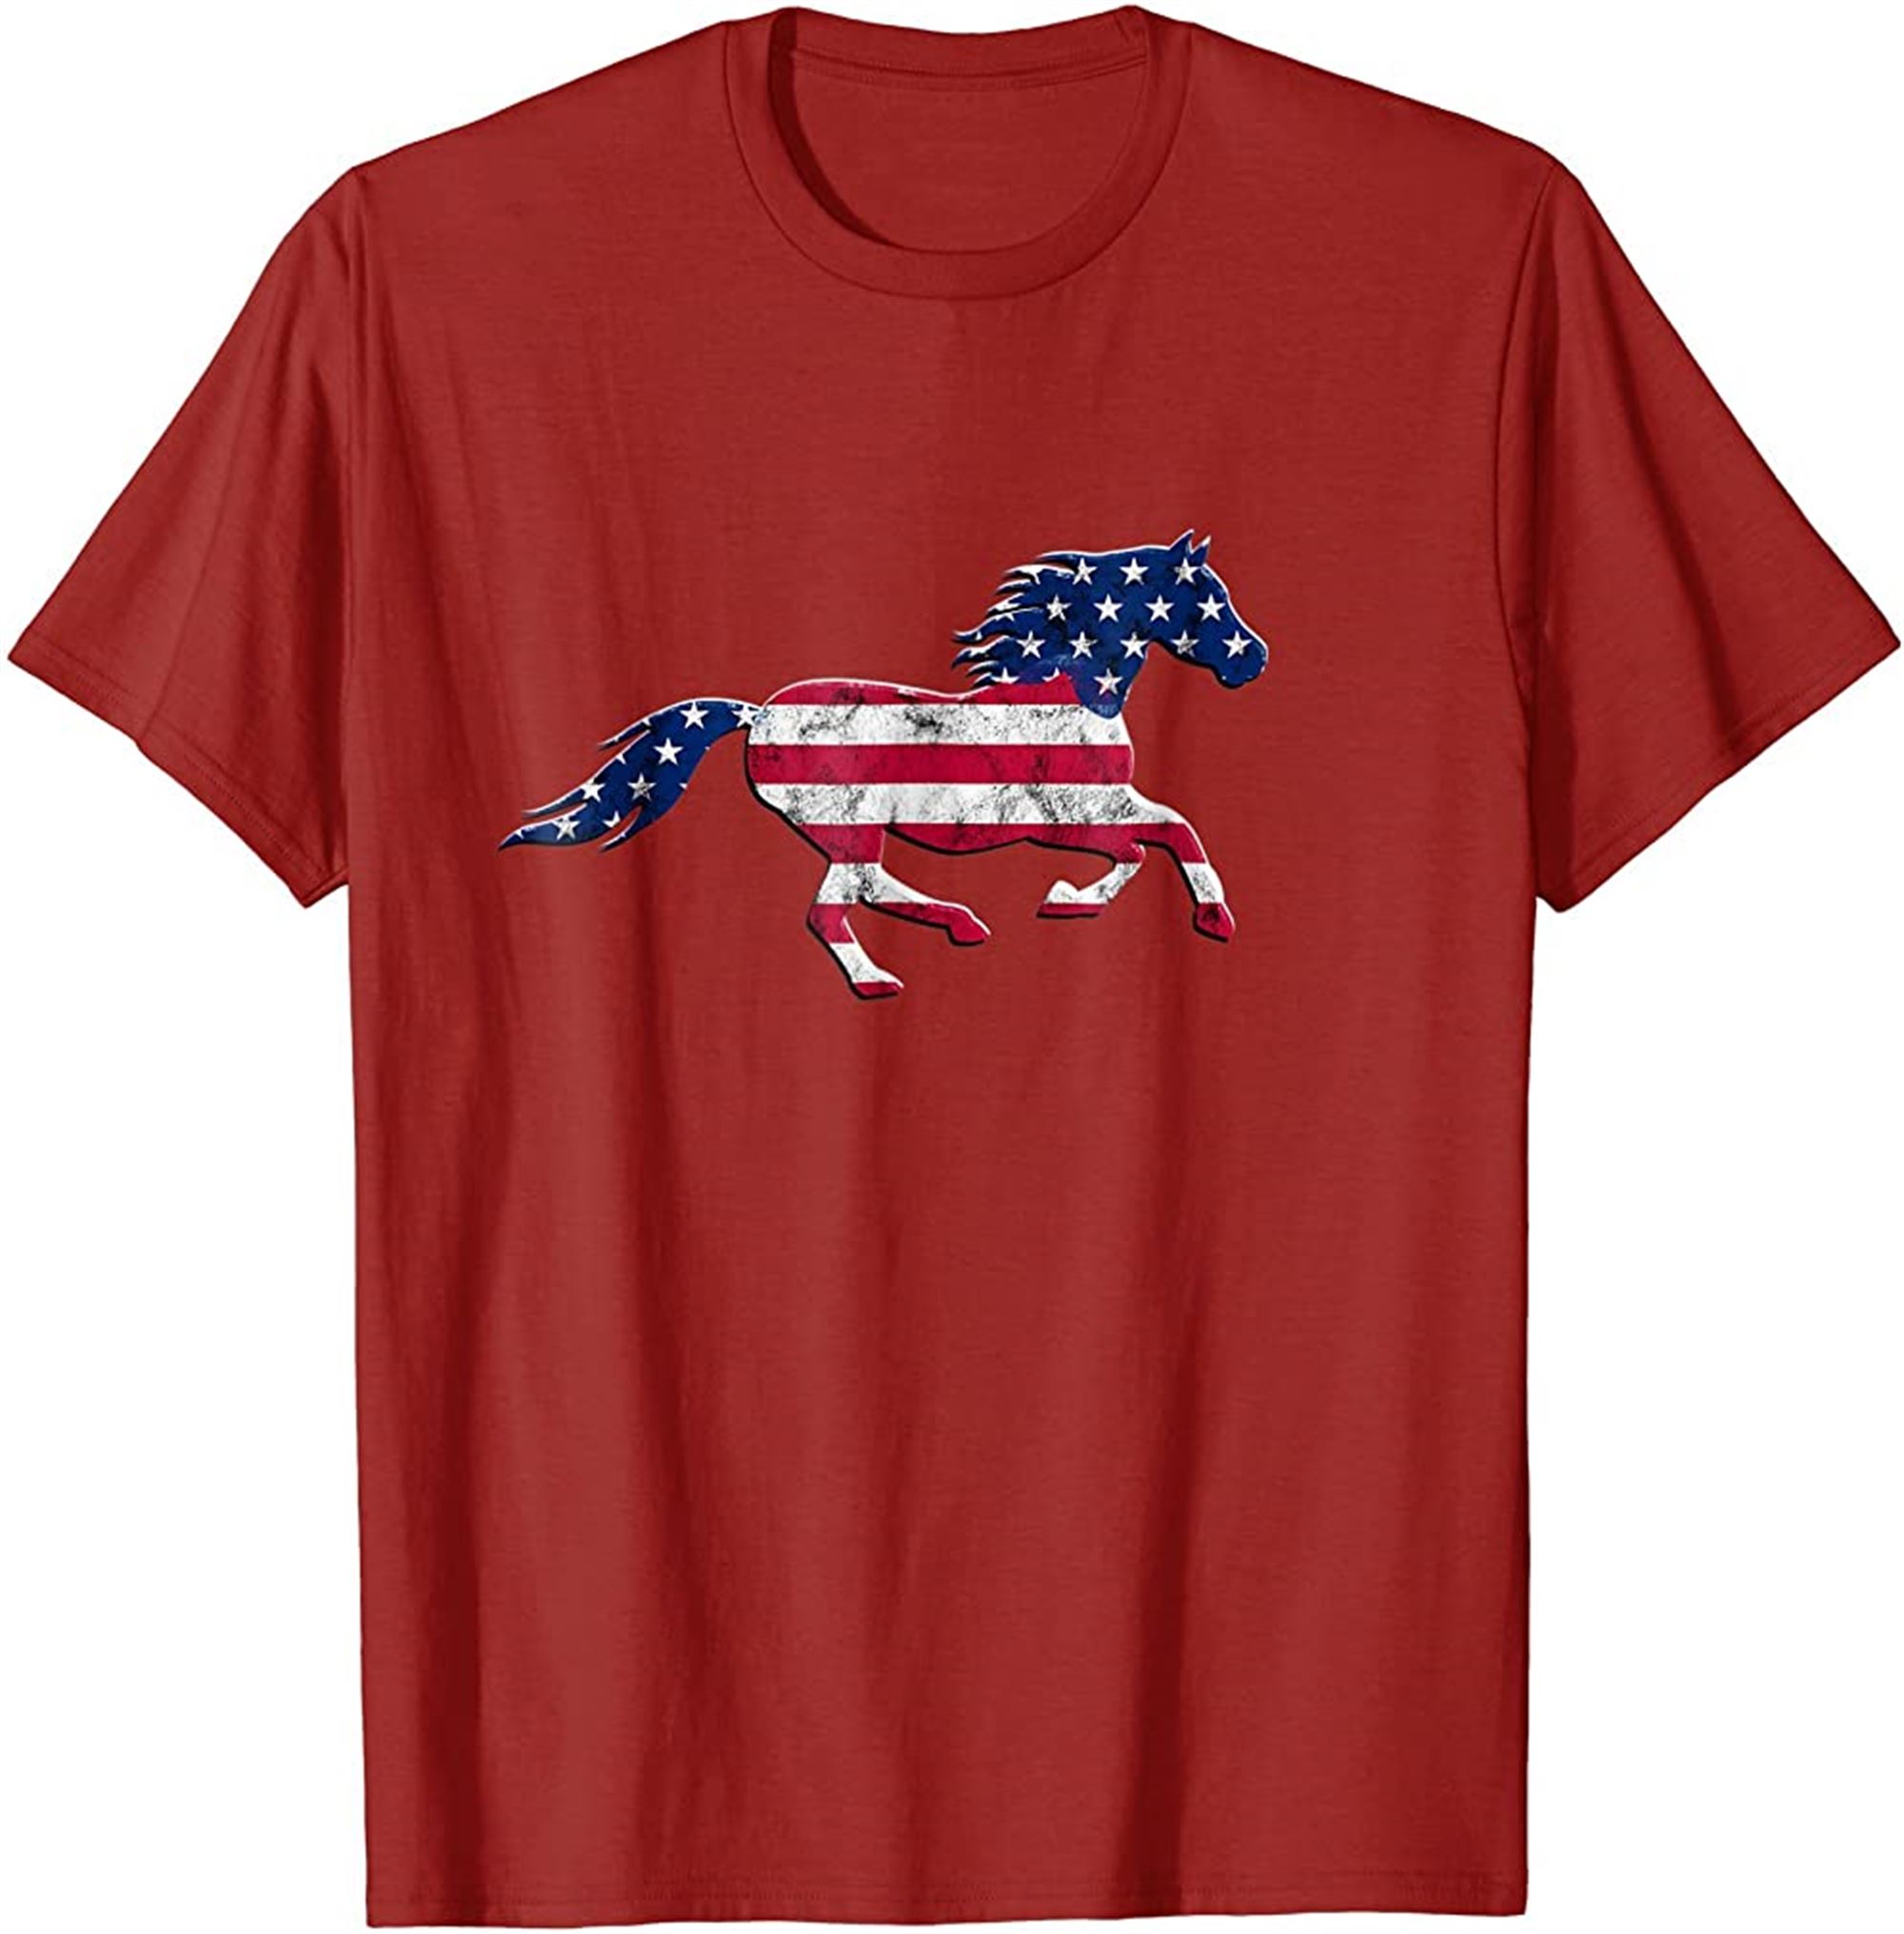 Patriotic Horse T Shirt 4th Of July Birthday Gift Full Size Up To 5xl